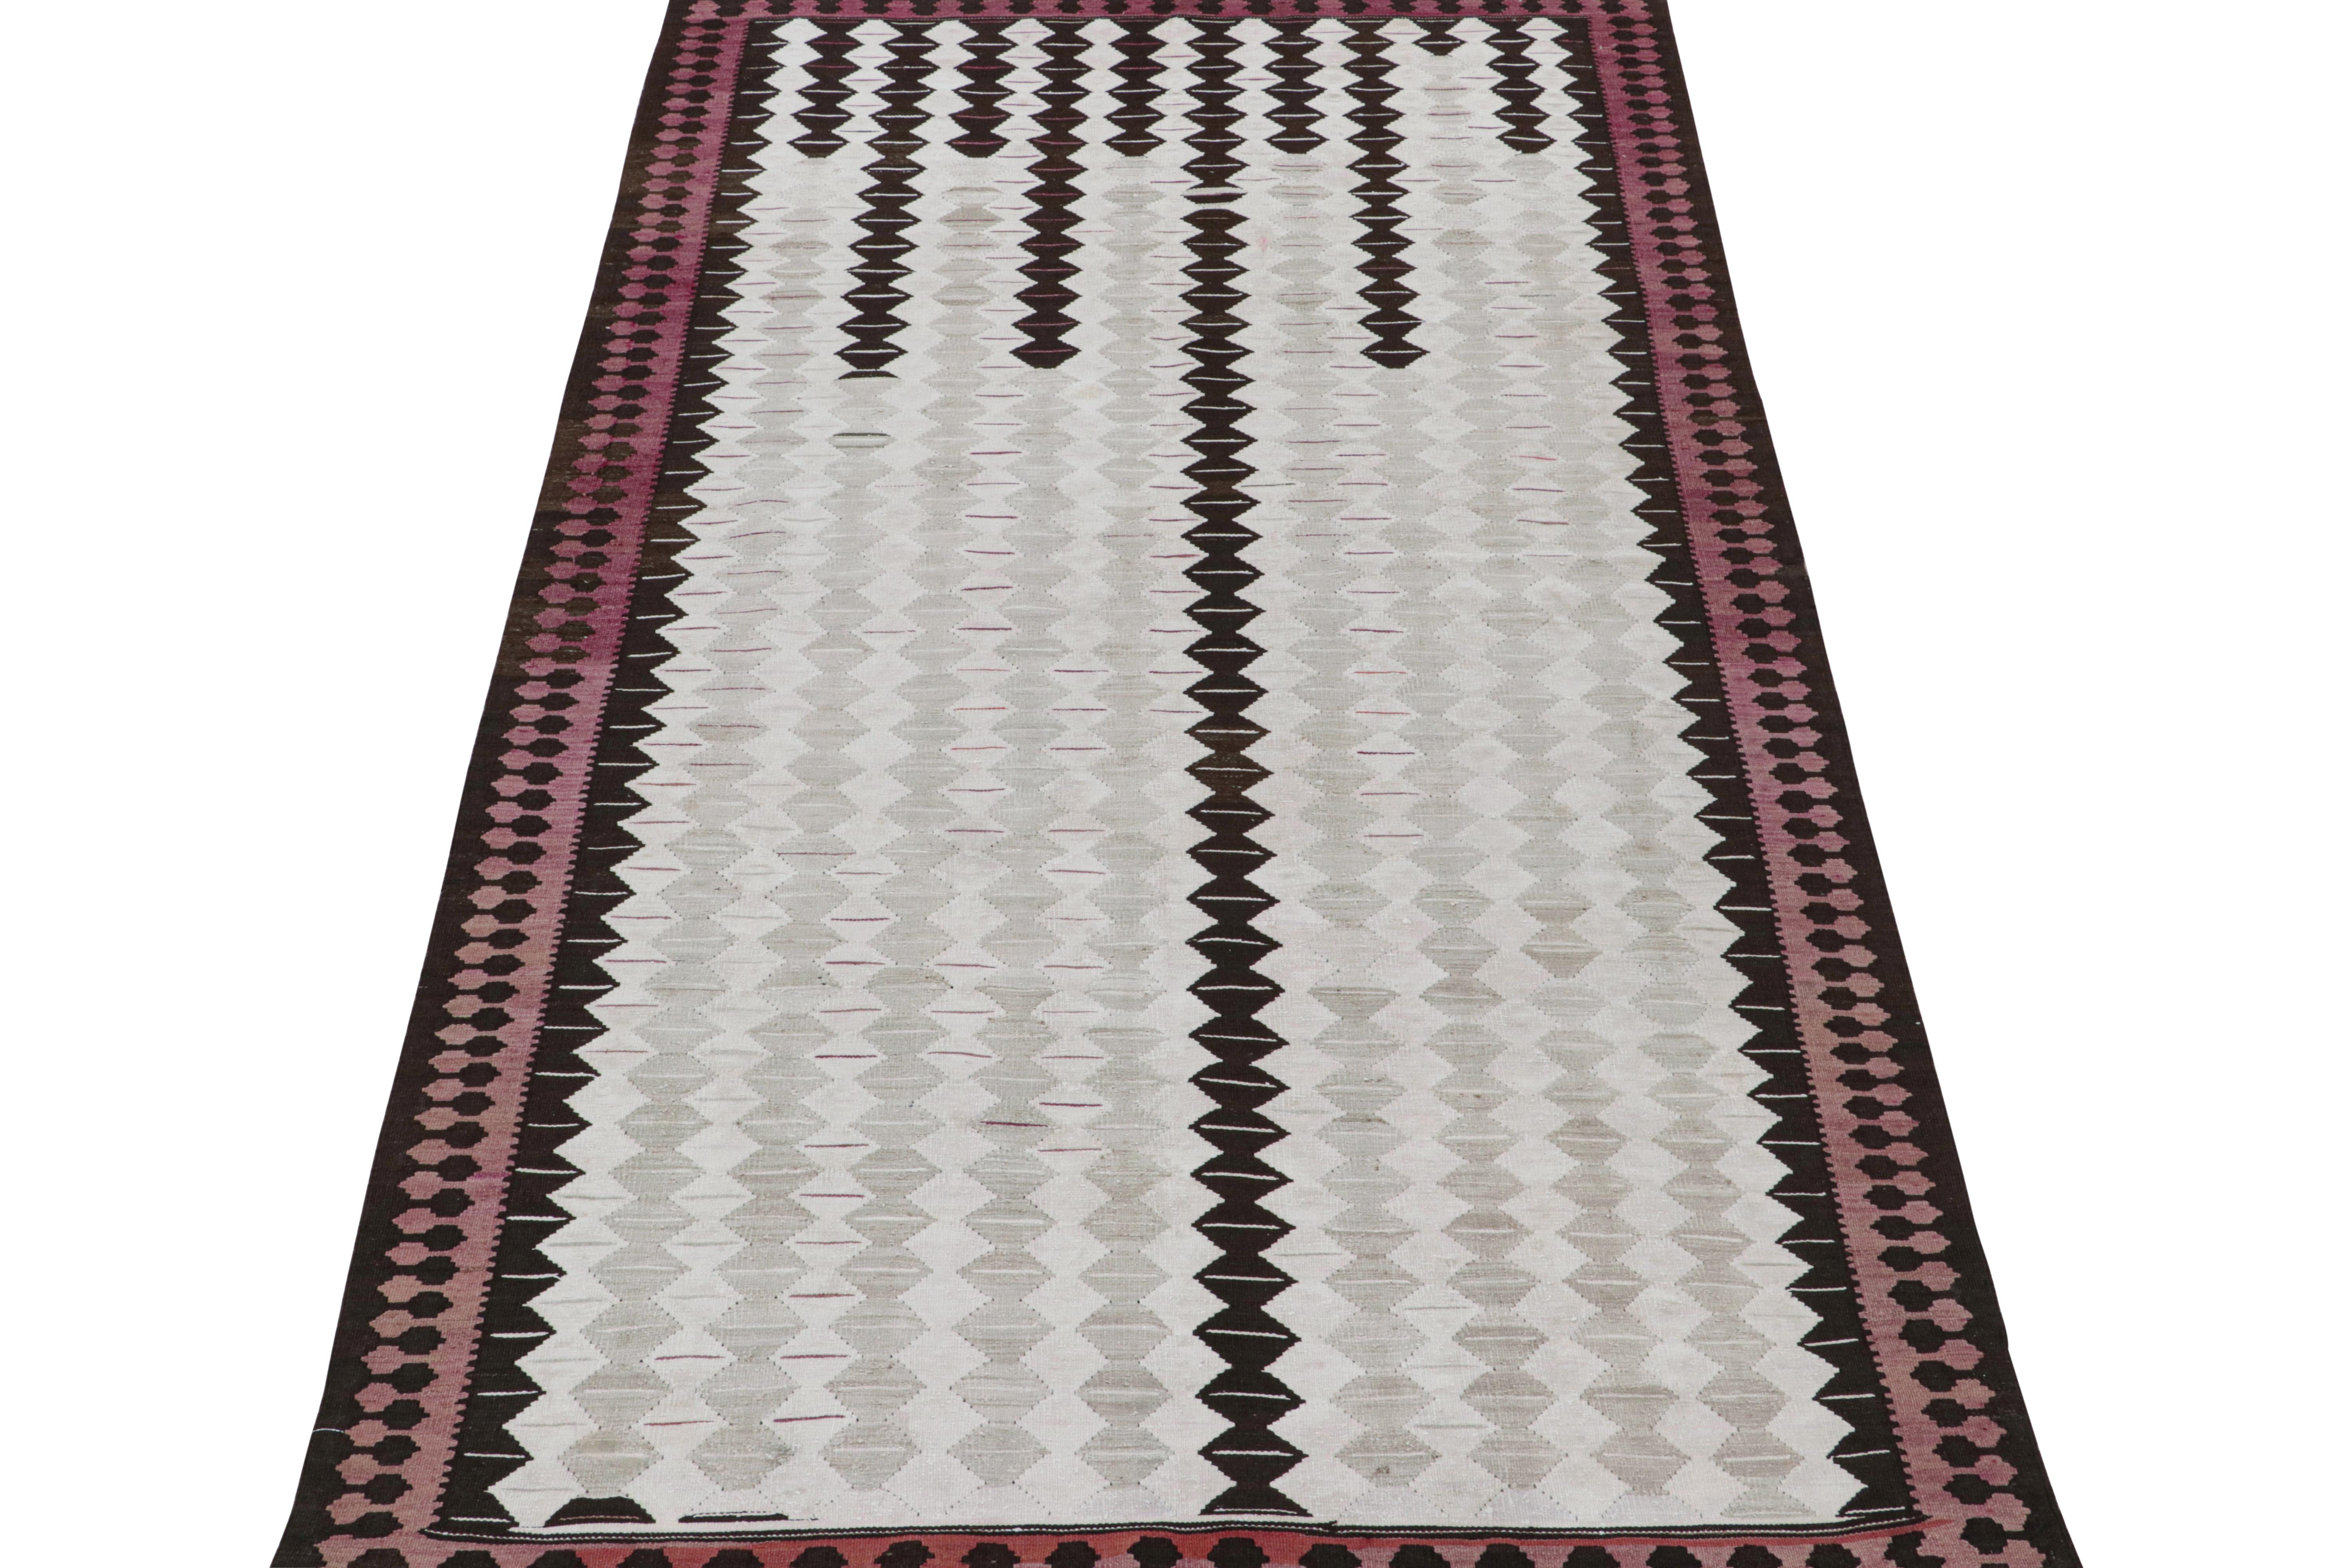 This vintage 6x10 Persian Kilim is a rare midcentury Shahsavan rug, believed to originate from the city of Qazvin. 

On the Design: 

Handwoven in wool circa 1950-1960, connoisseurs will note its unique colors, especially its many silver-gray